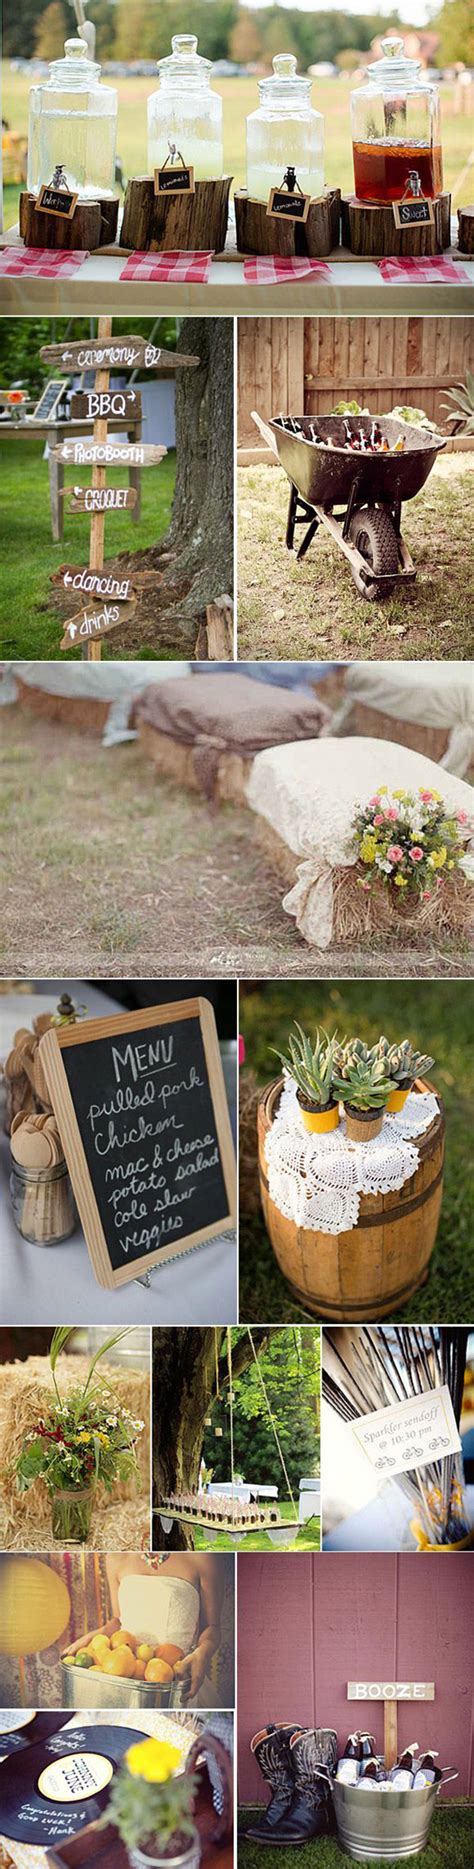 Country Themed Wedding Decorations Wedding Country Rustic Decorations